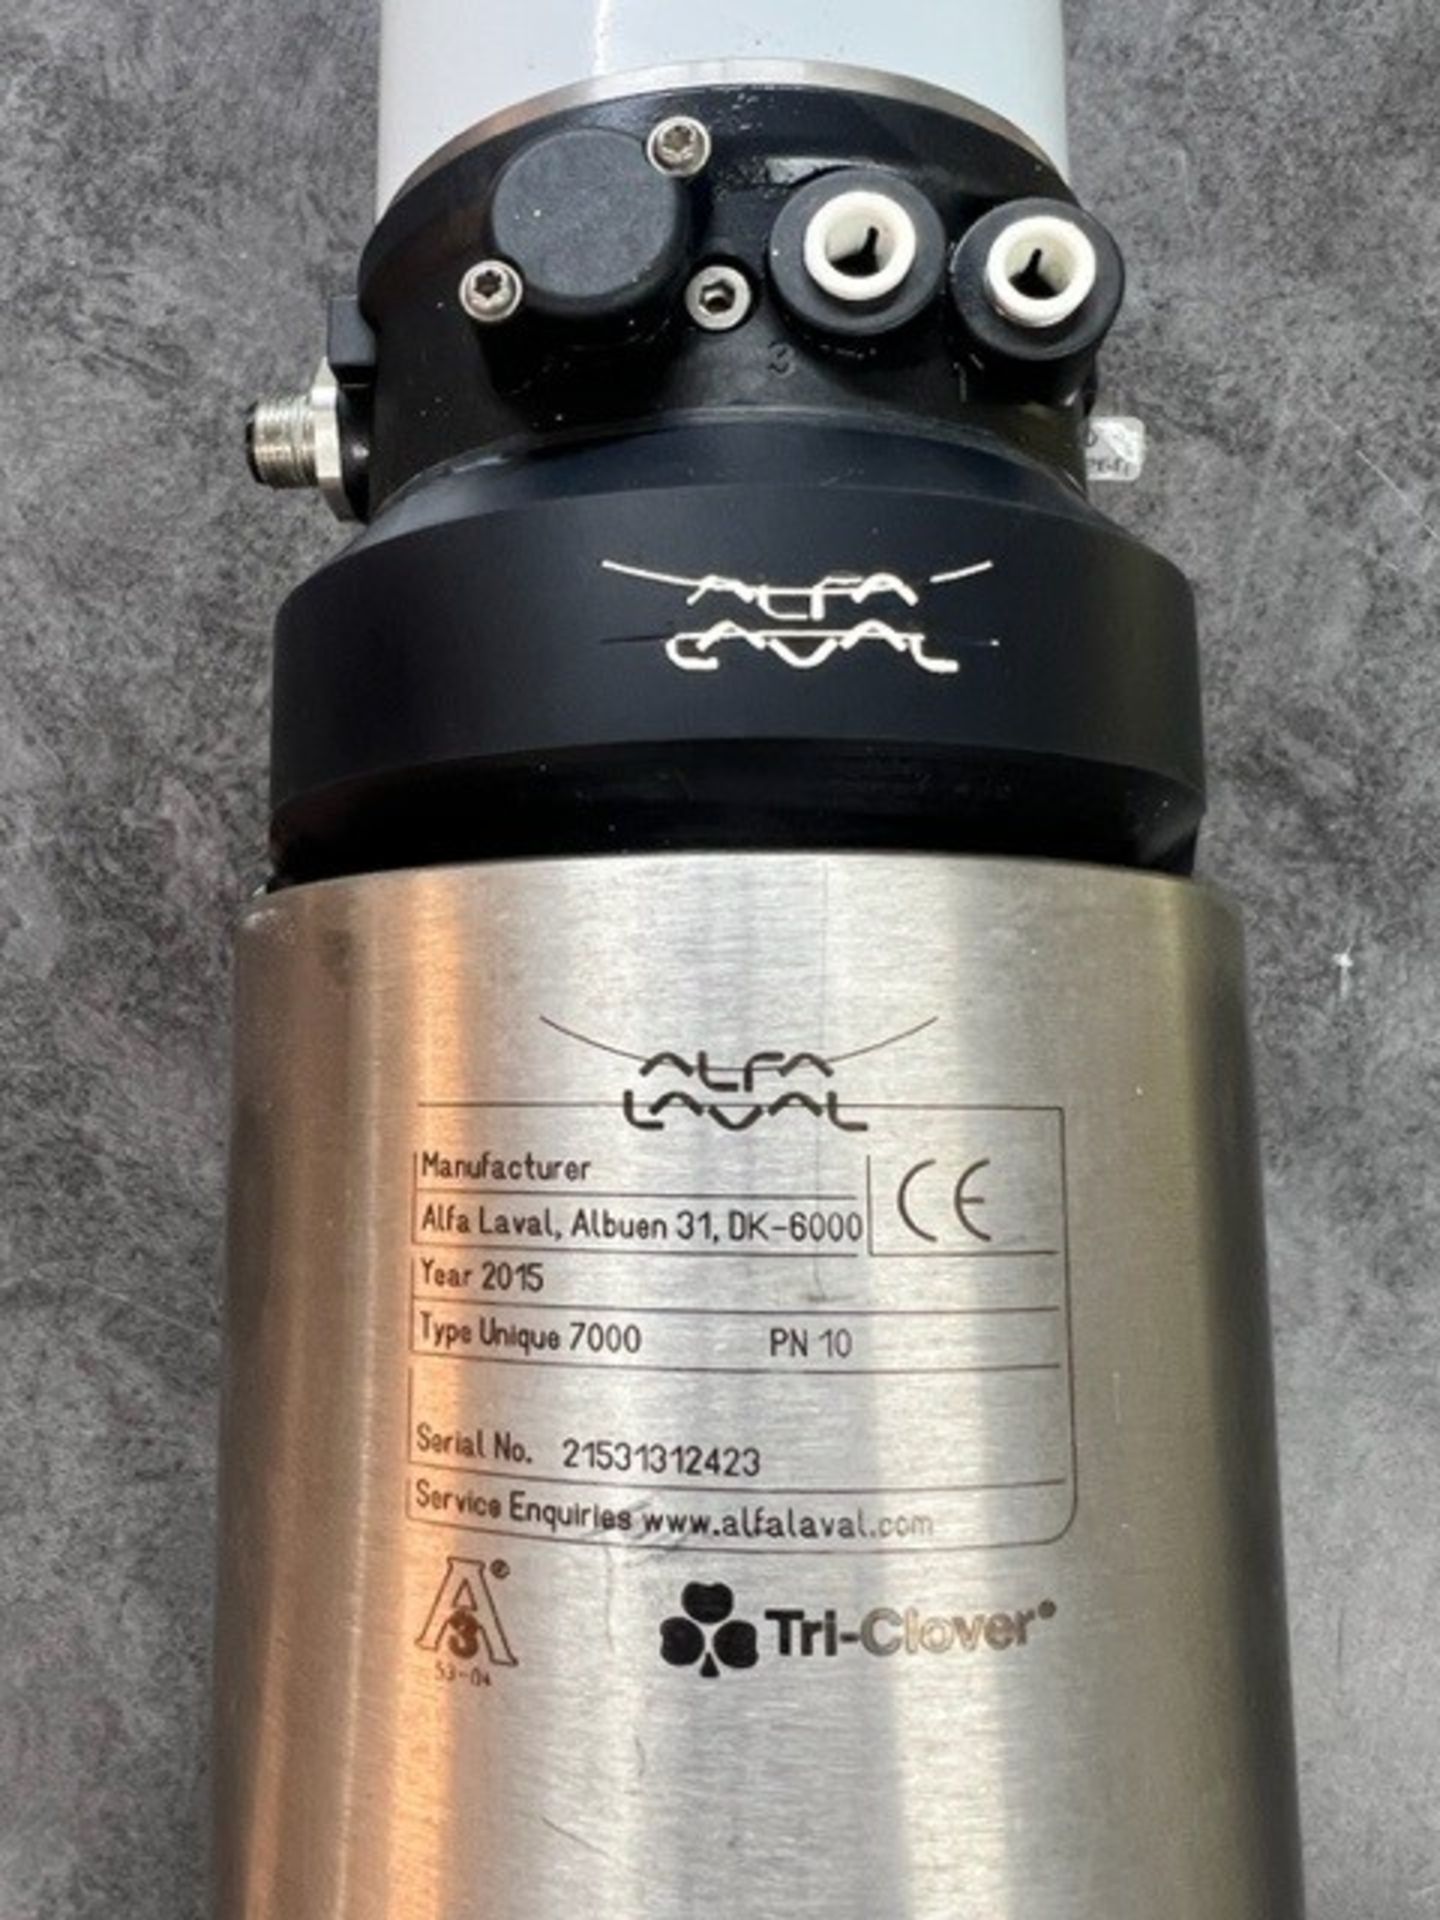 Alfa Laval 2.5 inch Stop Valve, DK-6000 Type Unique 7,000 Stainless Stem (Load Fee $50) (Locaed - Image 2 of 6